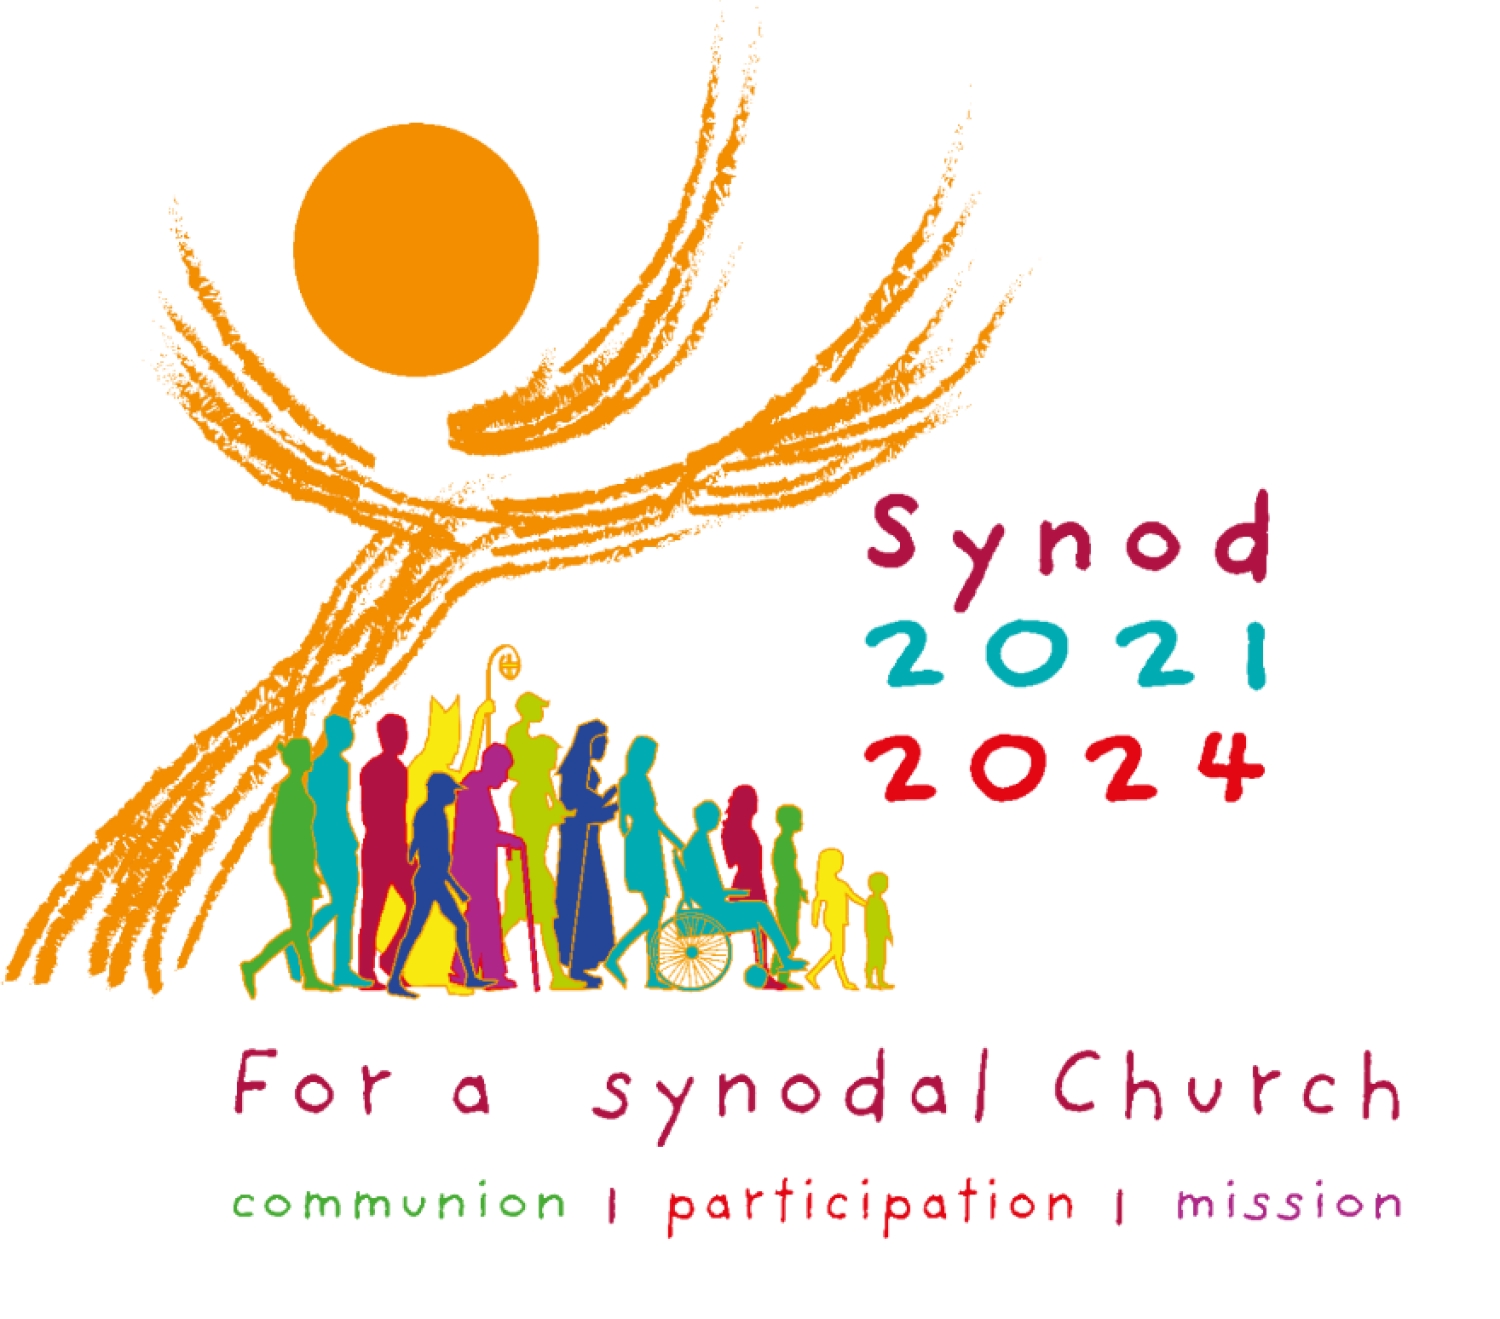 New dates for the Synod on Synodality